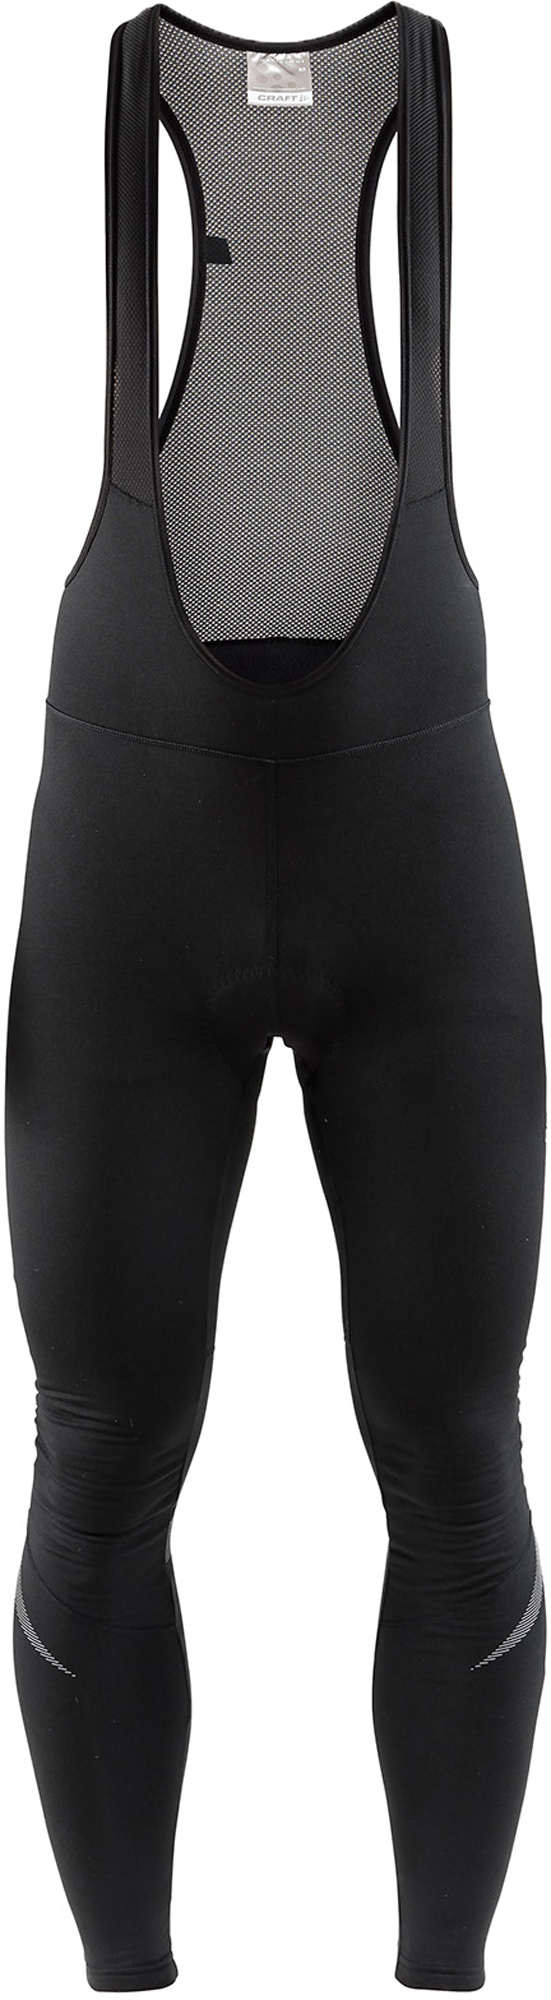 Men’s insulated cycling pants